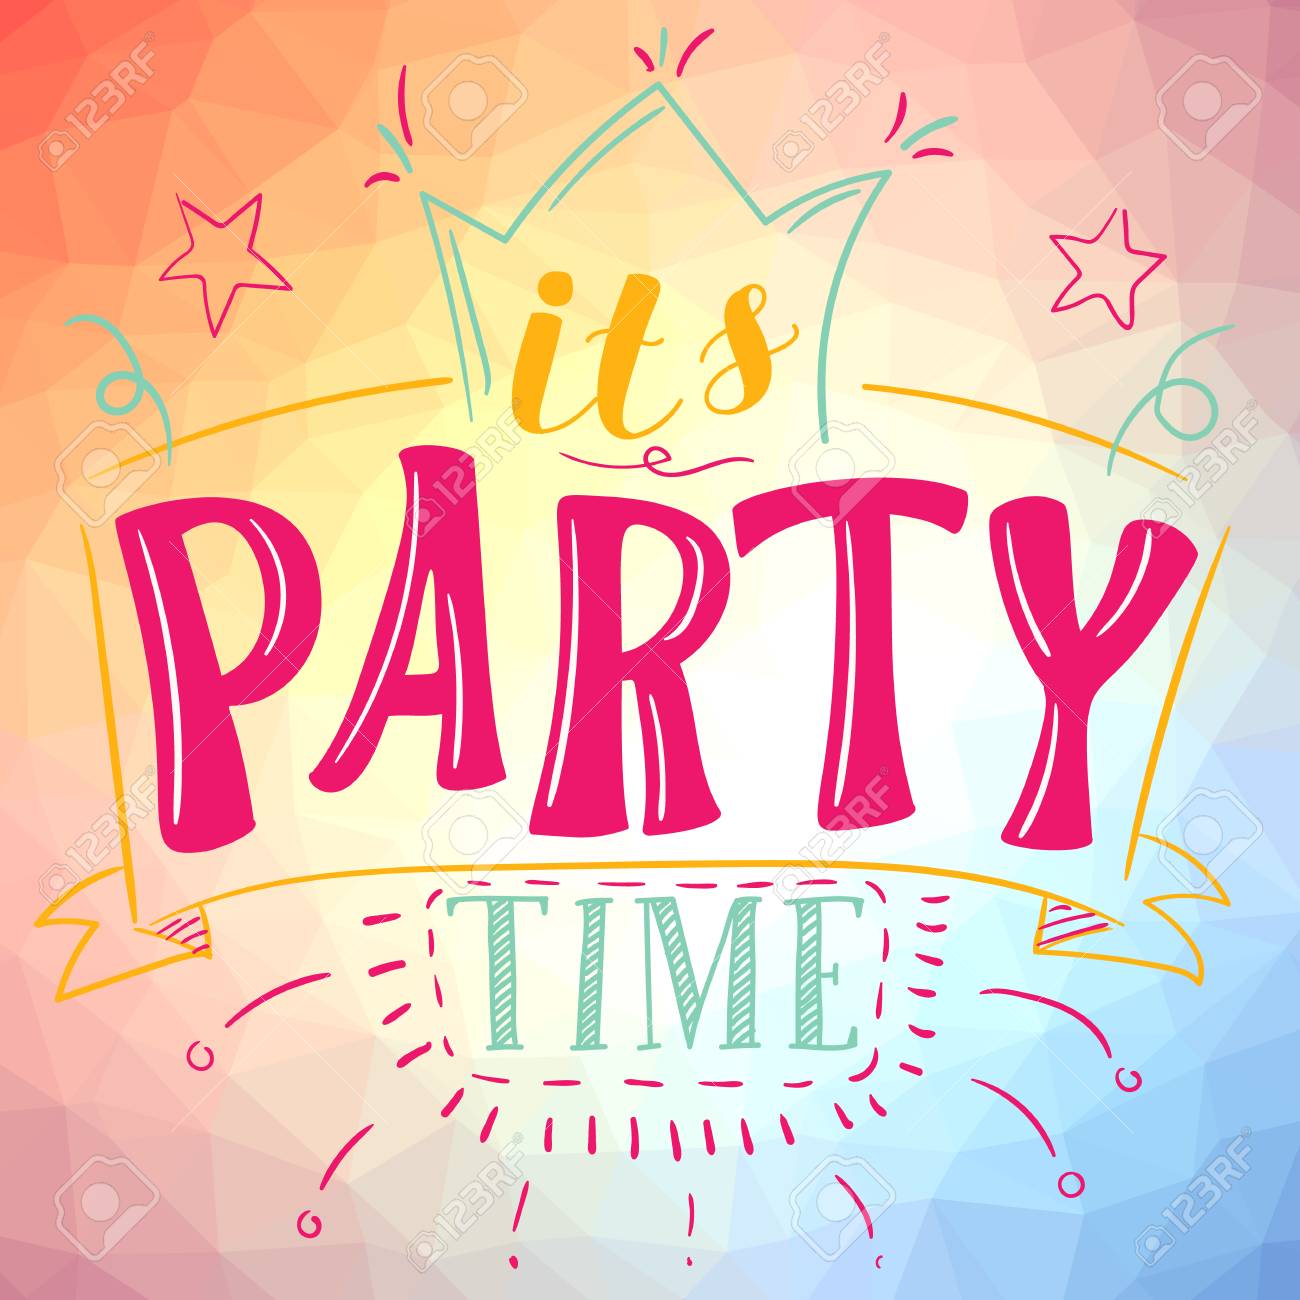 It's party time poster vector illustration social media clip...